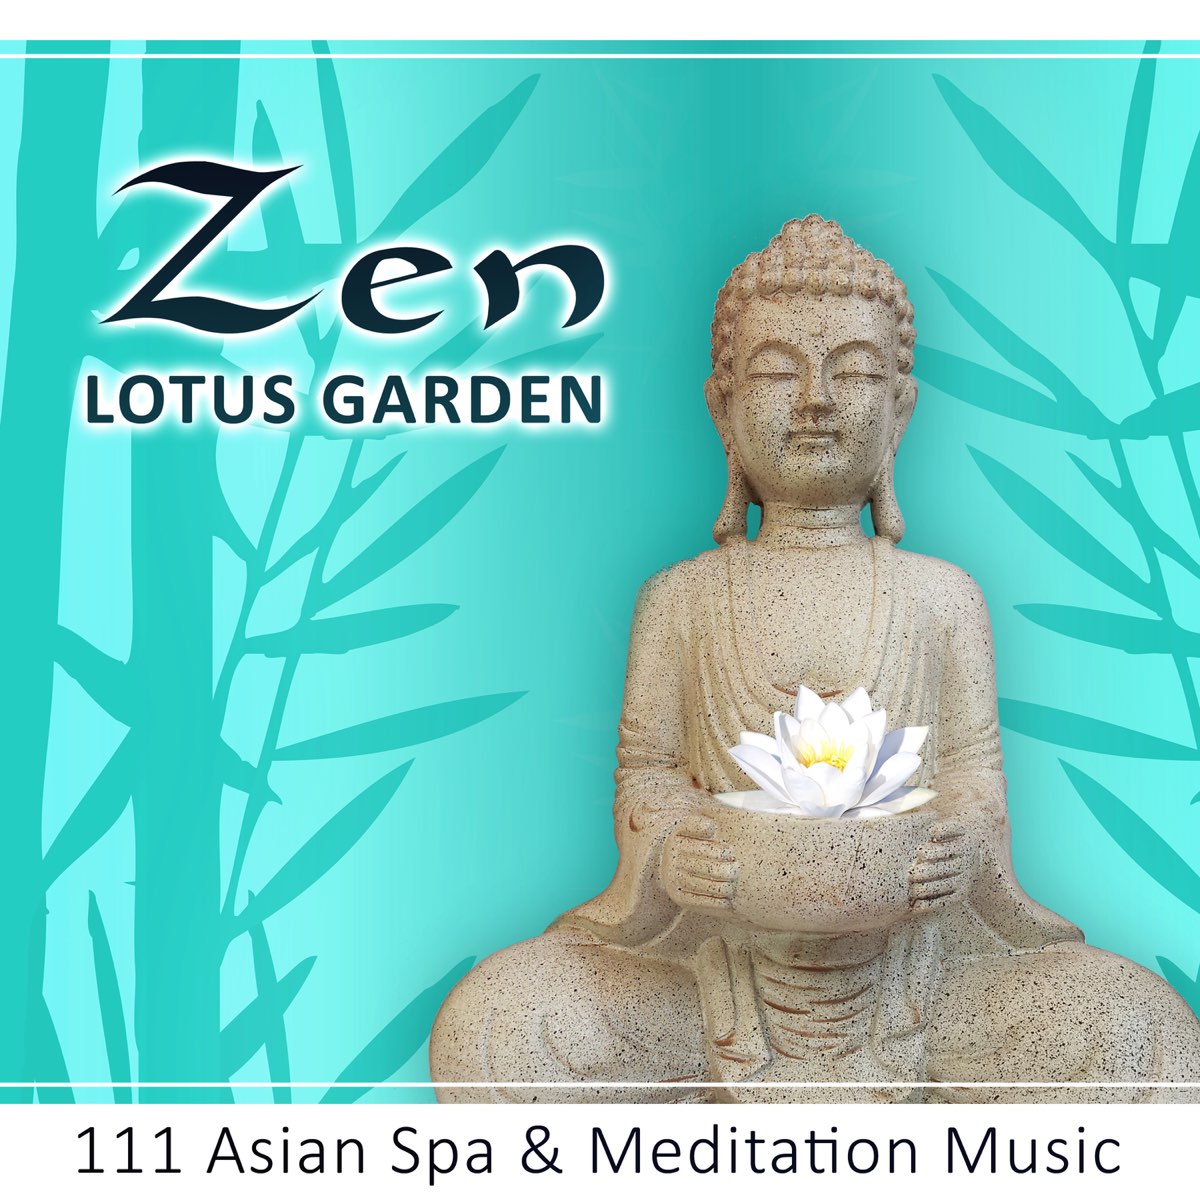 Zen Lotus Garden: 111 Asian Spa & Meditation Music, Sound Therapy for Yoga  & Relaxation, Pure Massage, Healing Songs for Deep Sleep - Album by Garden  of Zen Music - Apple Music